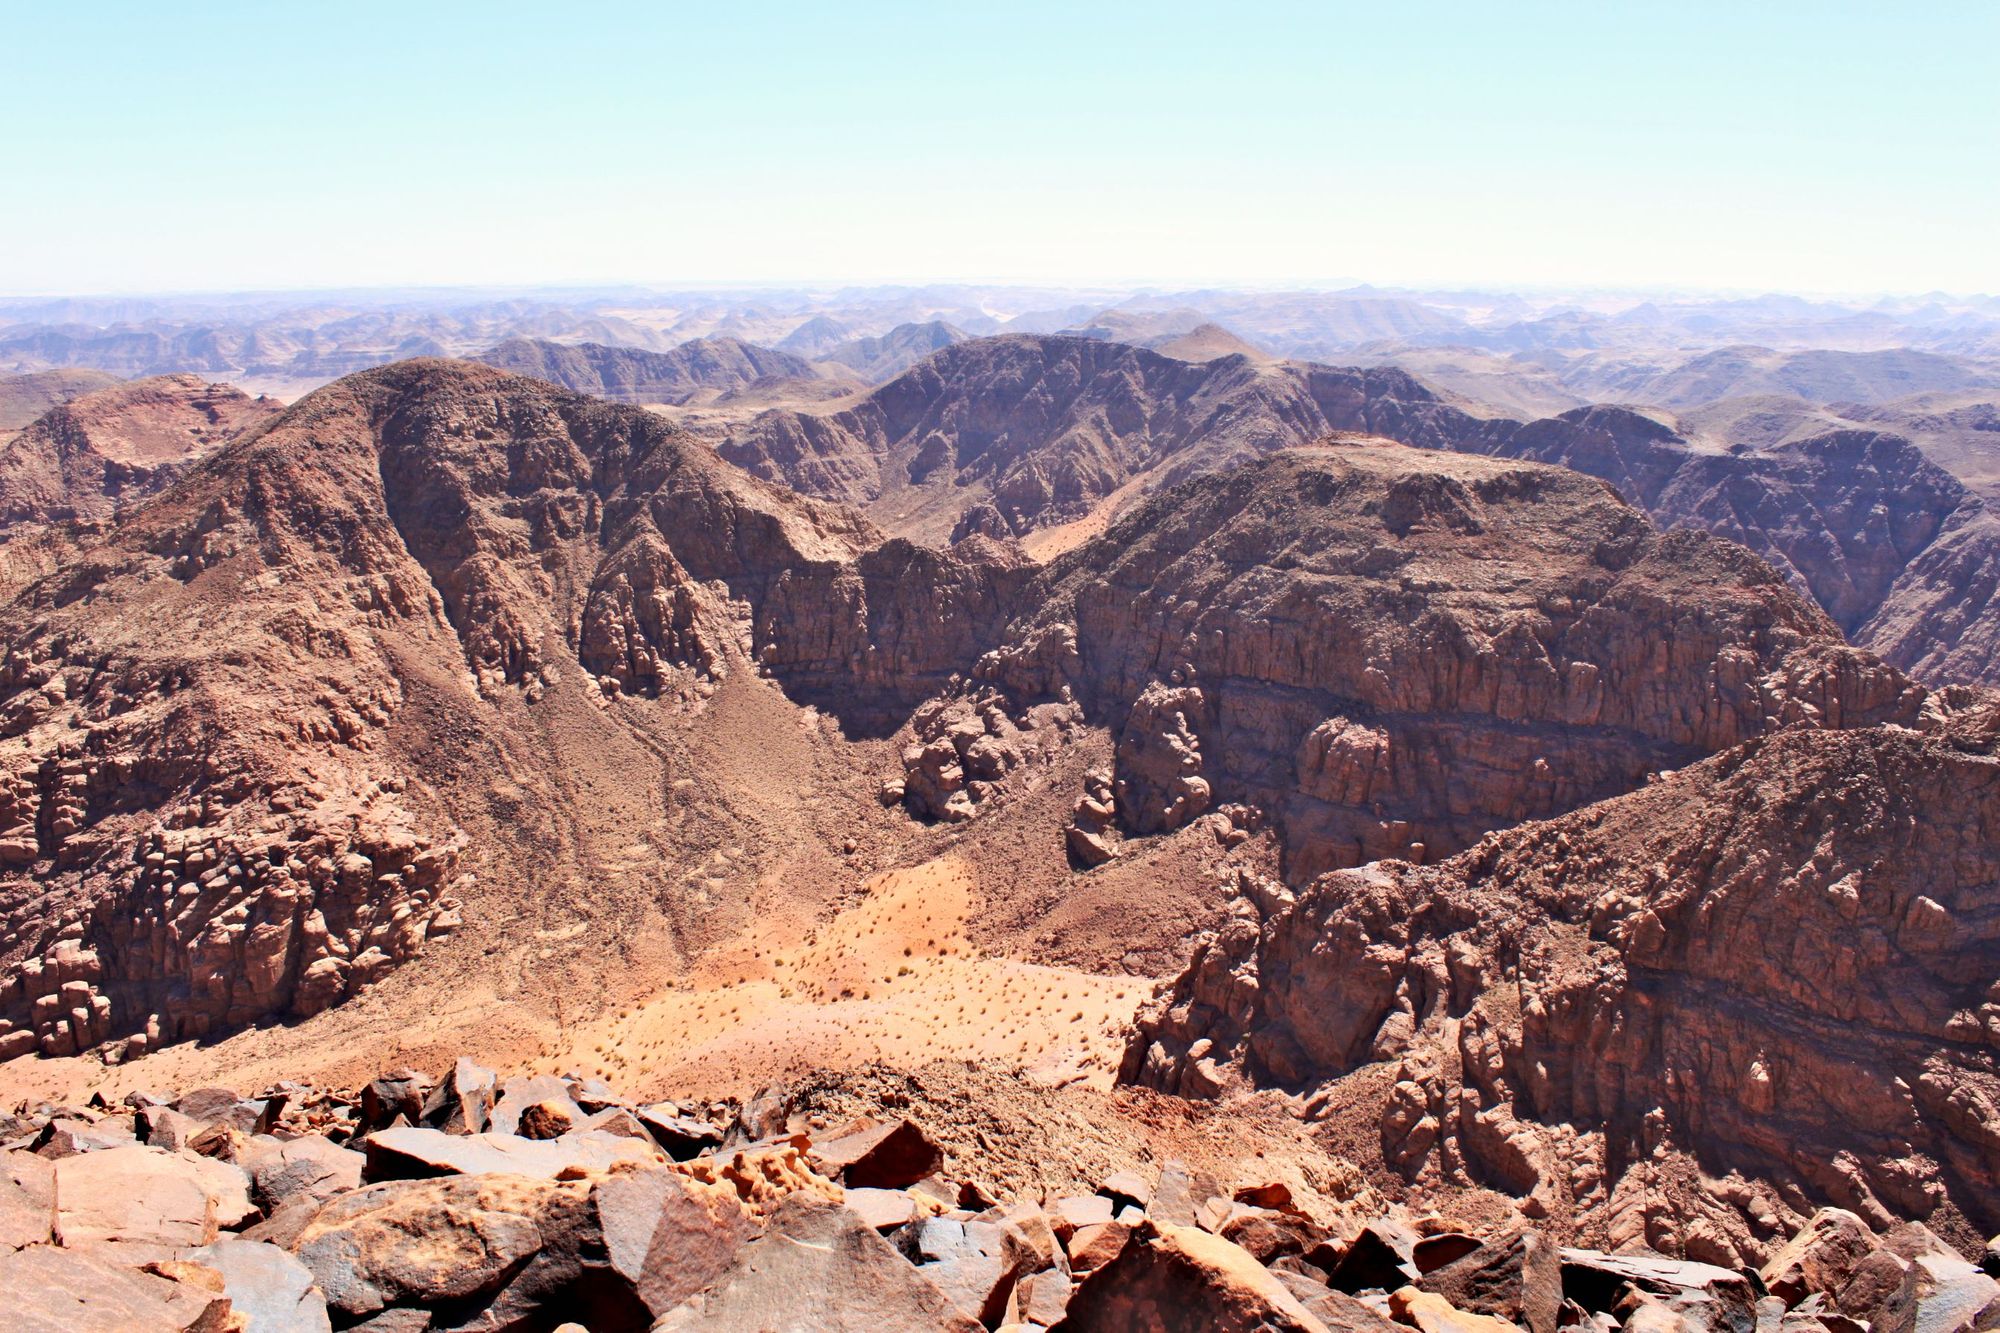 The view from the summit of Um Ad Dami, the highest mountain in Jordan.